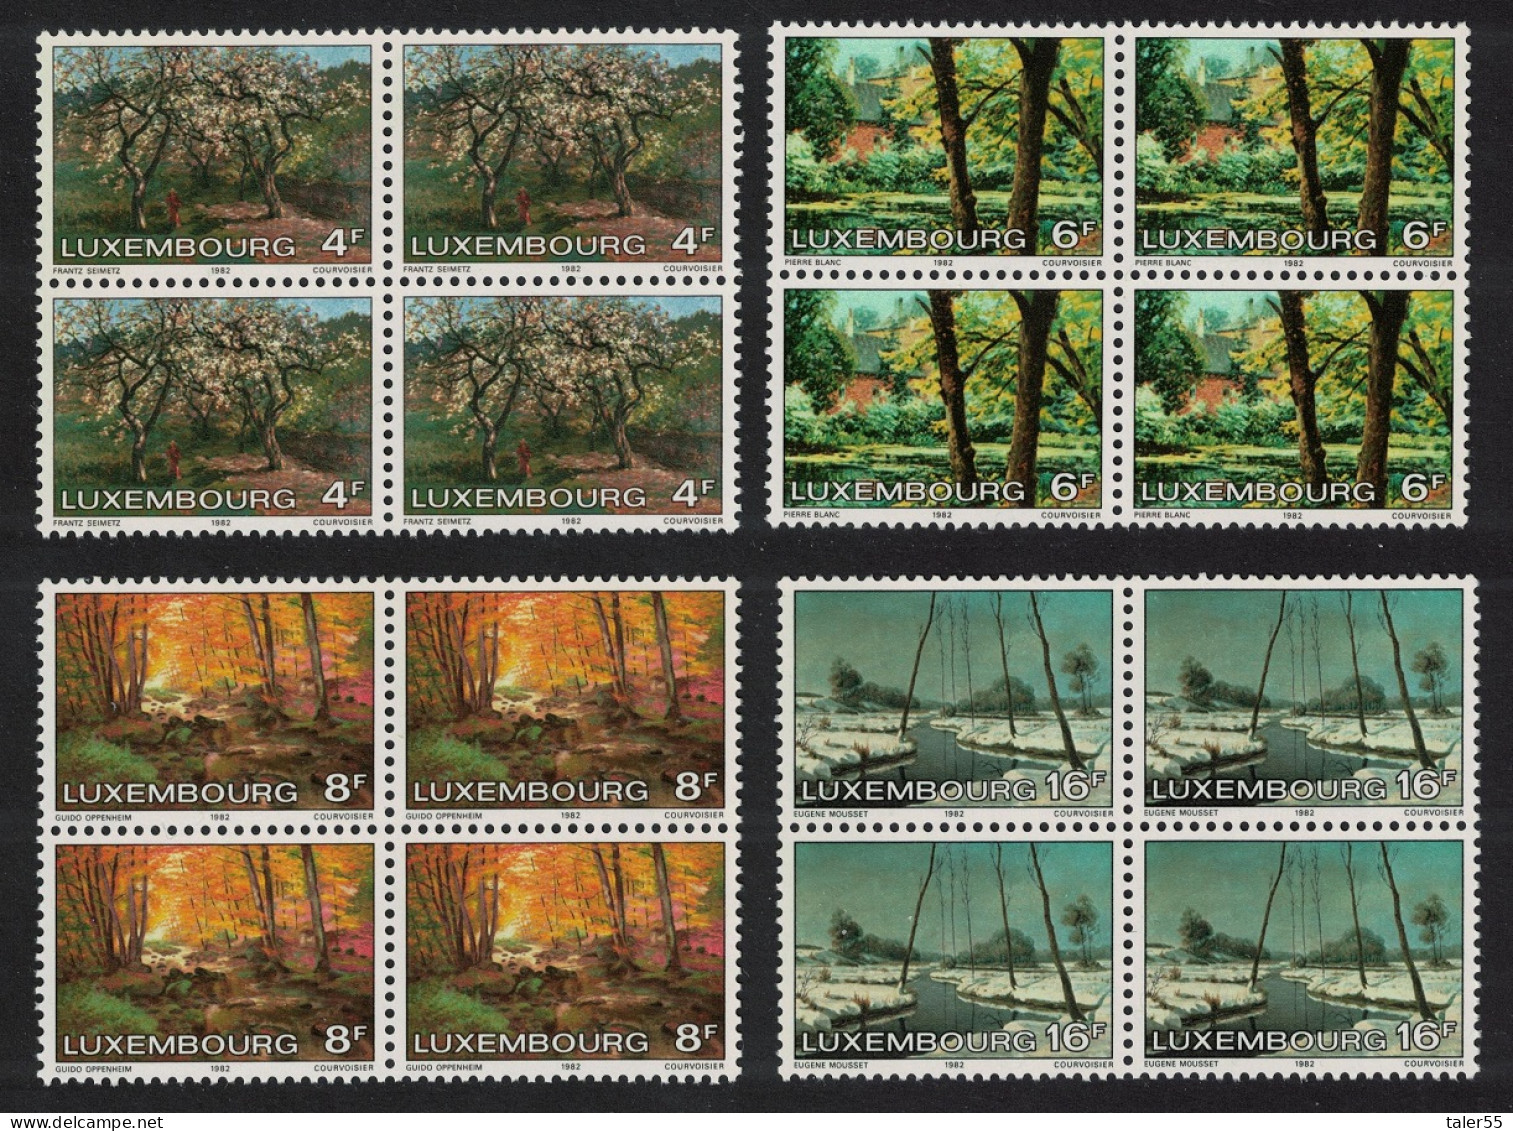 Luxembourg Paintings Landscapes 4v Blocks Of 4 1982 MNH SG#1081-1084 MI#1046-1049 - Neufs